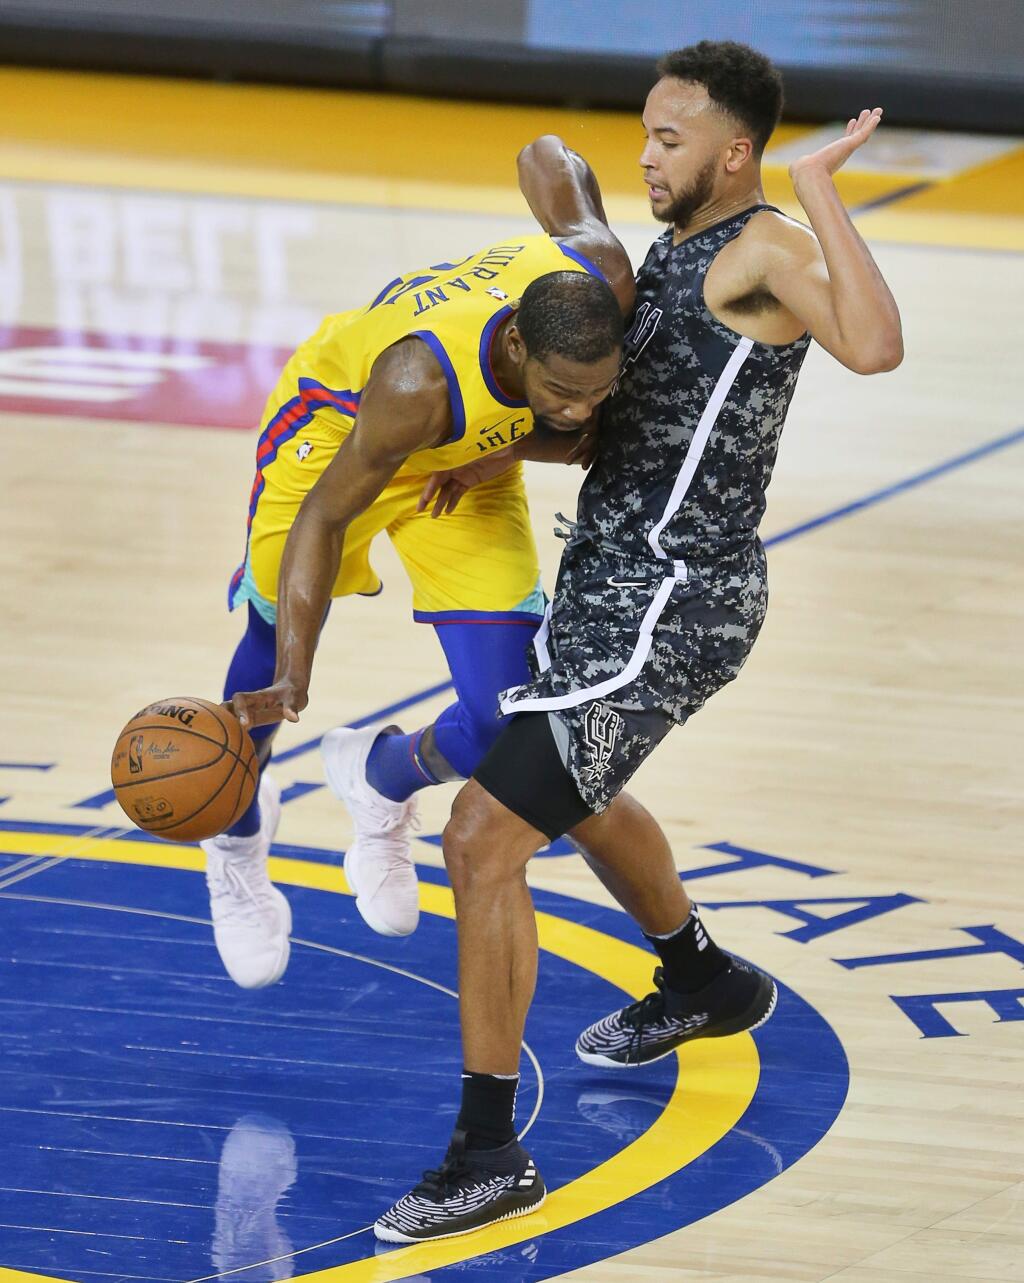 Golden State Warriors forward Kevin Durant is fouled by San Antonio Spurs' Kyle Anderson during their game in Oakland on Thursday, March 8, 2018. (Christopher Chung/ The Press Democrat)